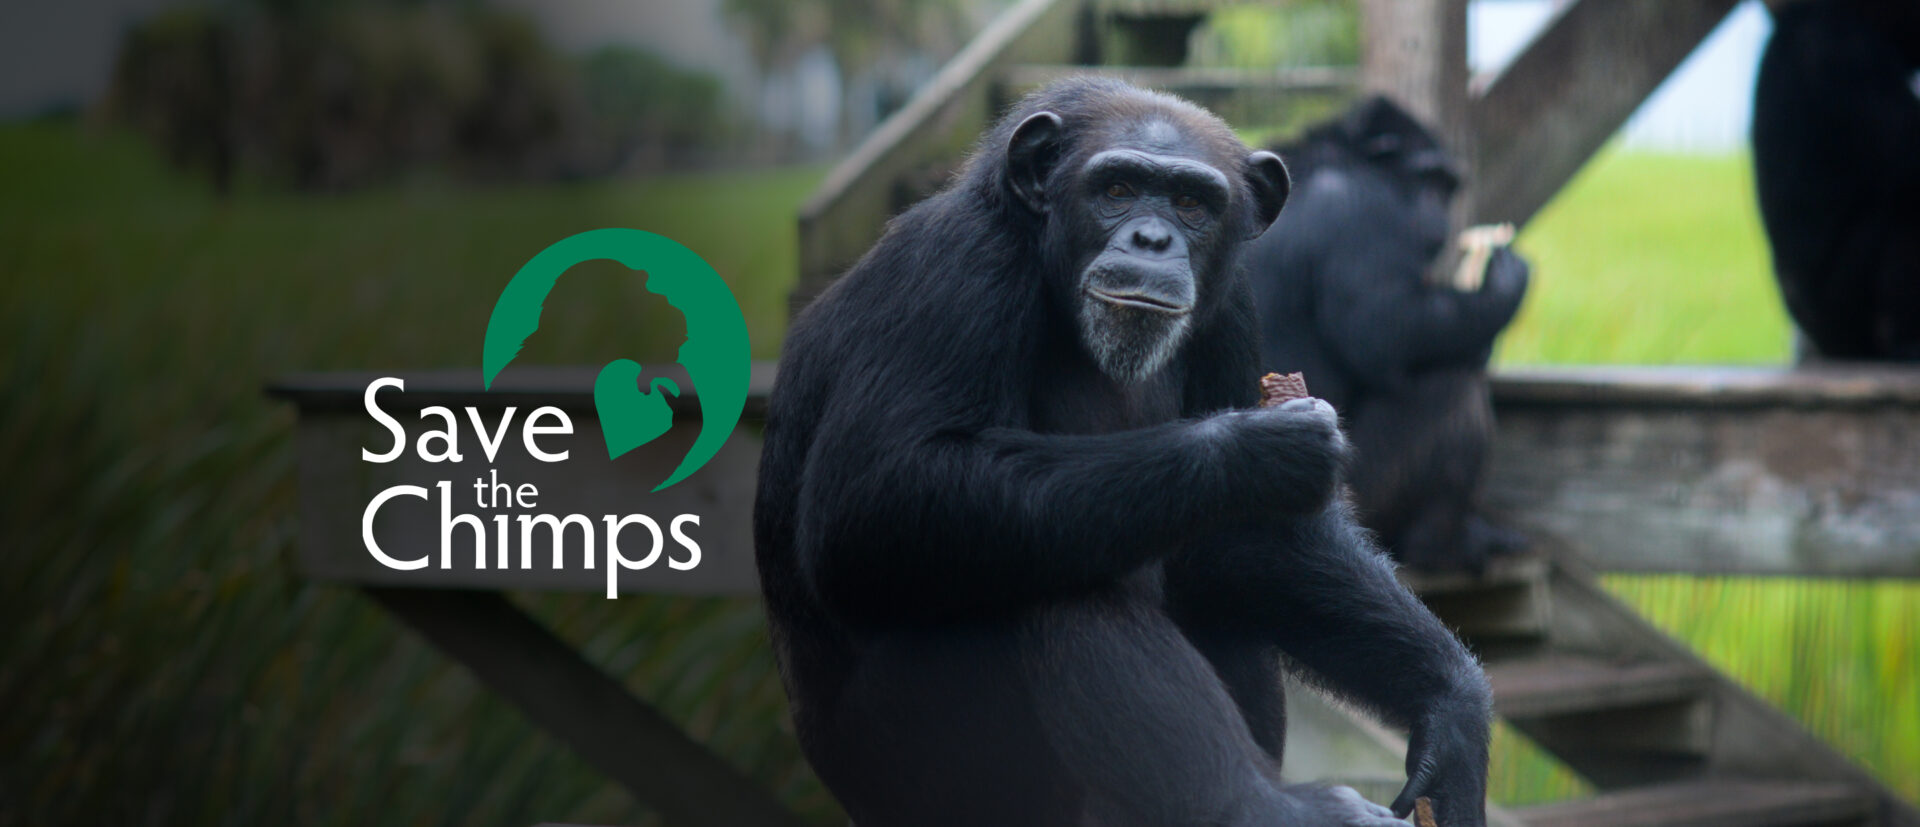 Save the Chimps